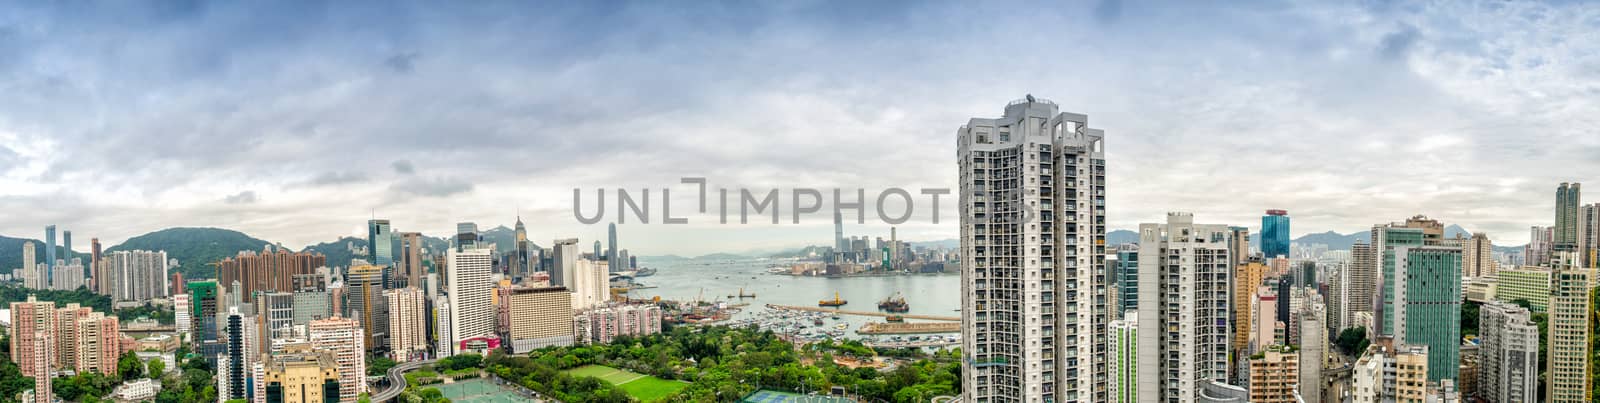 HONG KONG - MAY 12, 2014: Stunning panoramic view of Hong Kong Island and Kowloon on a cloudy day. Last year HK hosted more than 54 million visitors, most of them from the mainland.